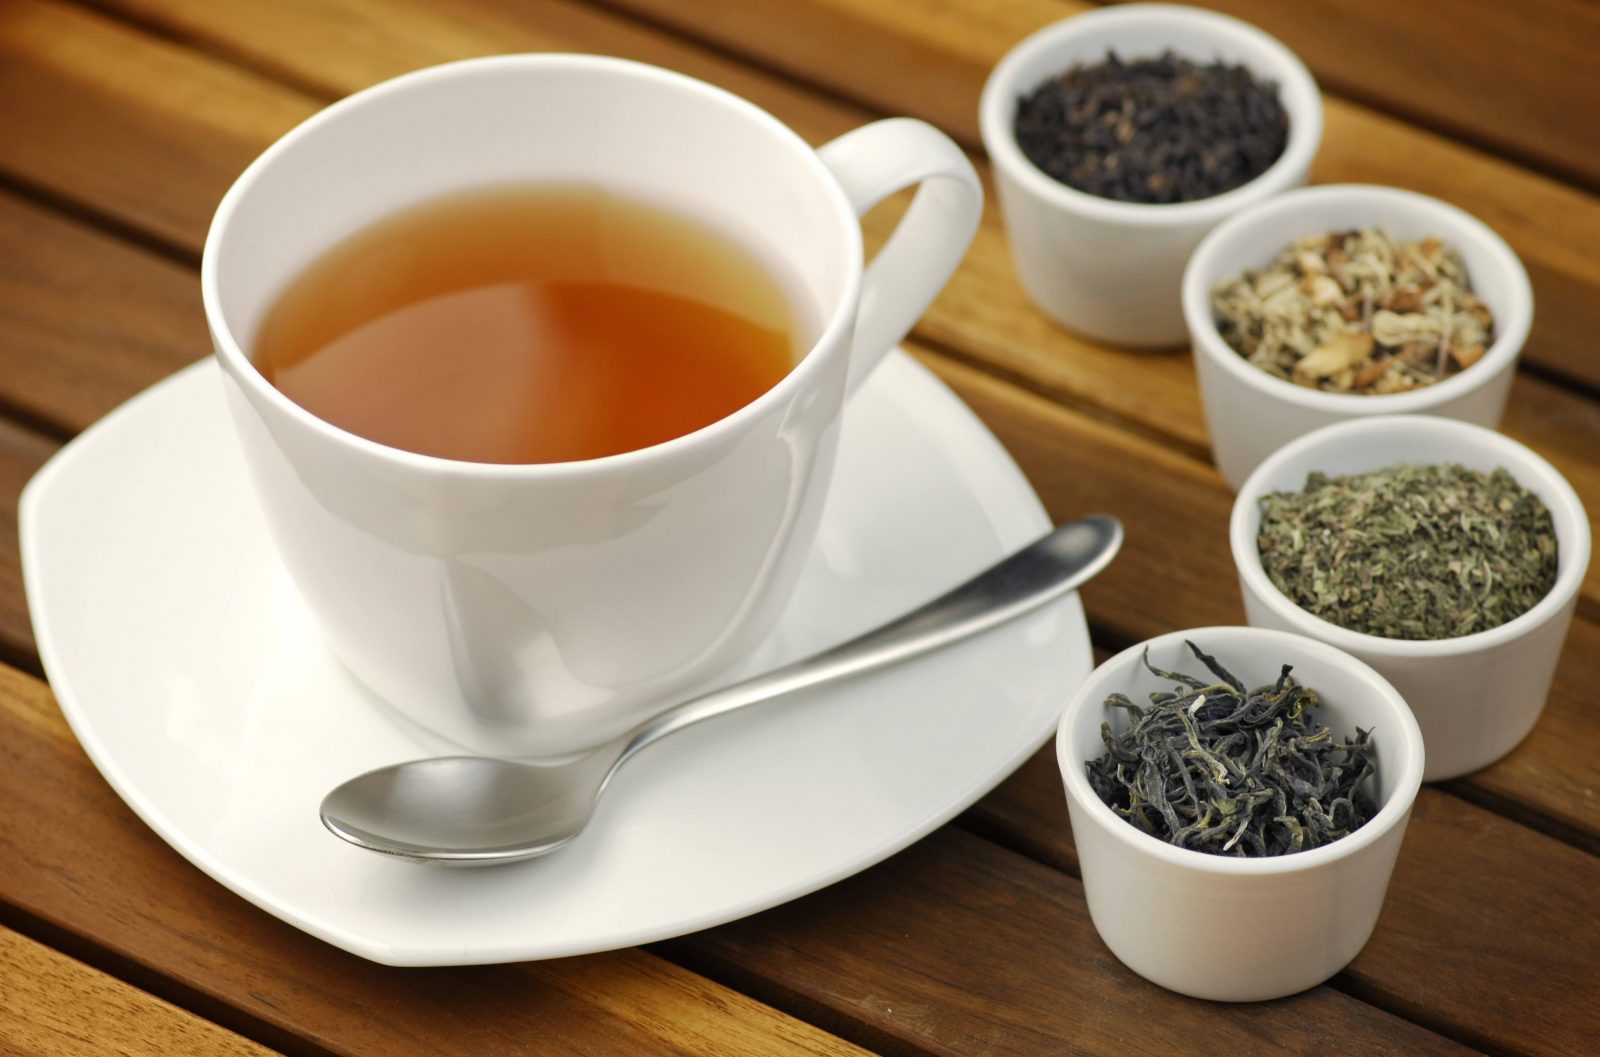 Which British Food Are You? different kinds of teas